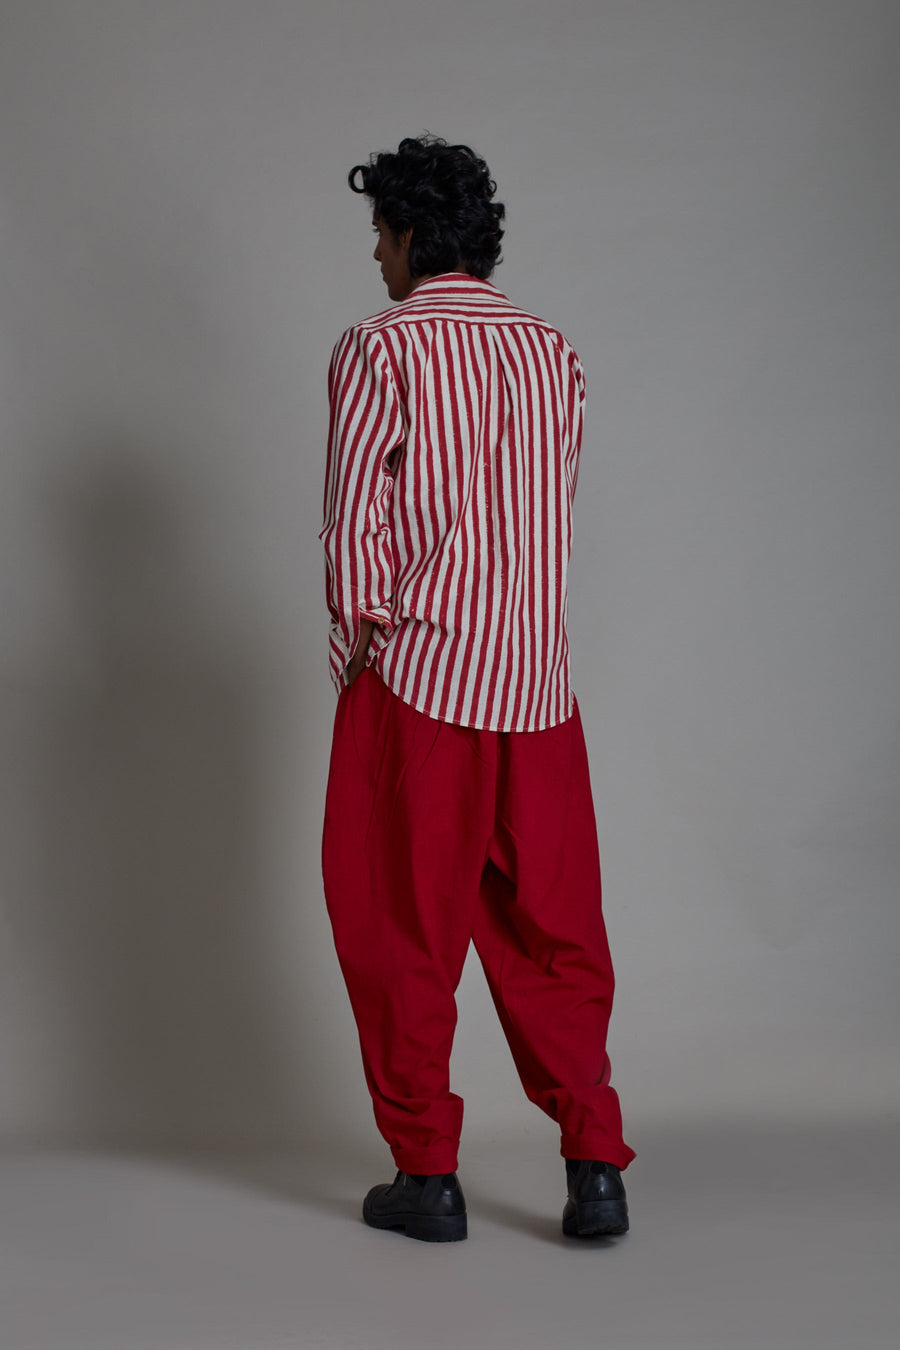 A Model Wearing White Pure Cotton Men's Striped Shirt-Red, curated by Only Ethikal